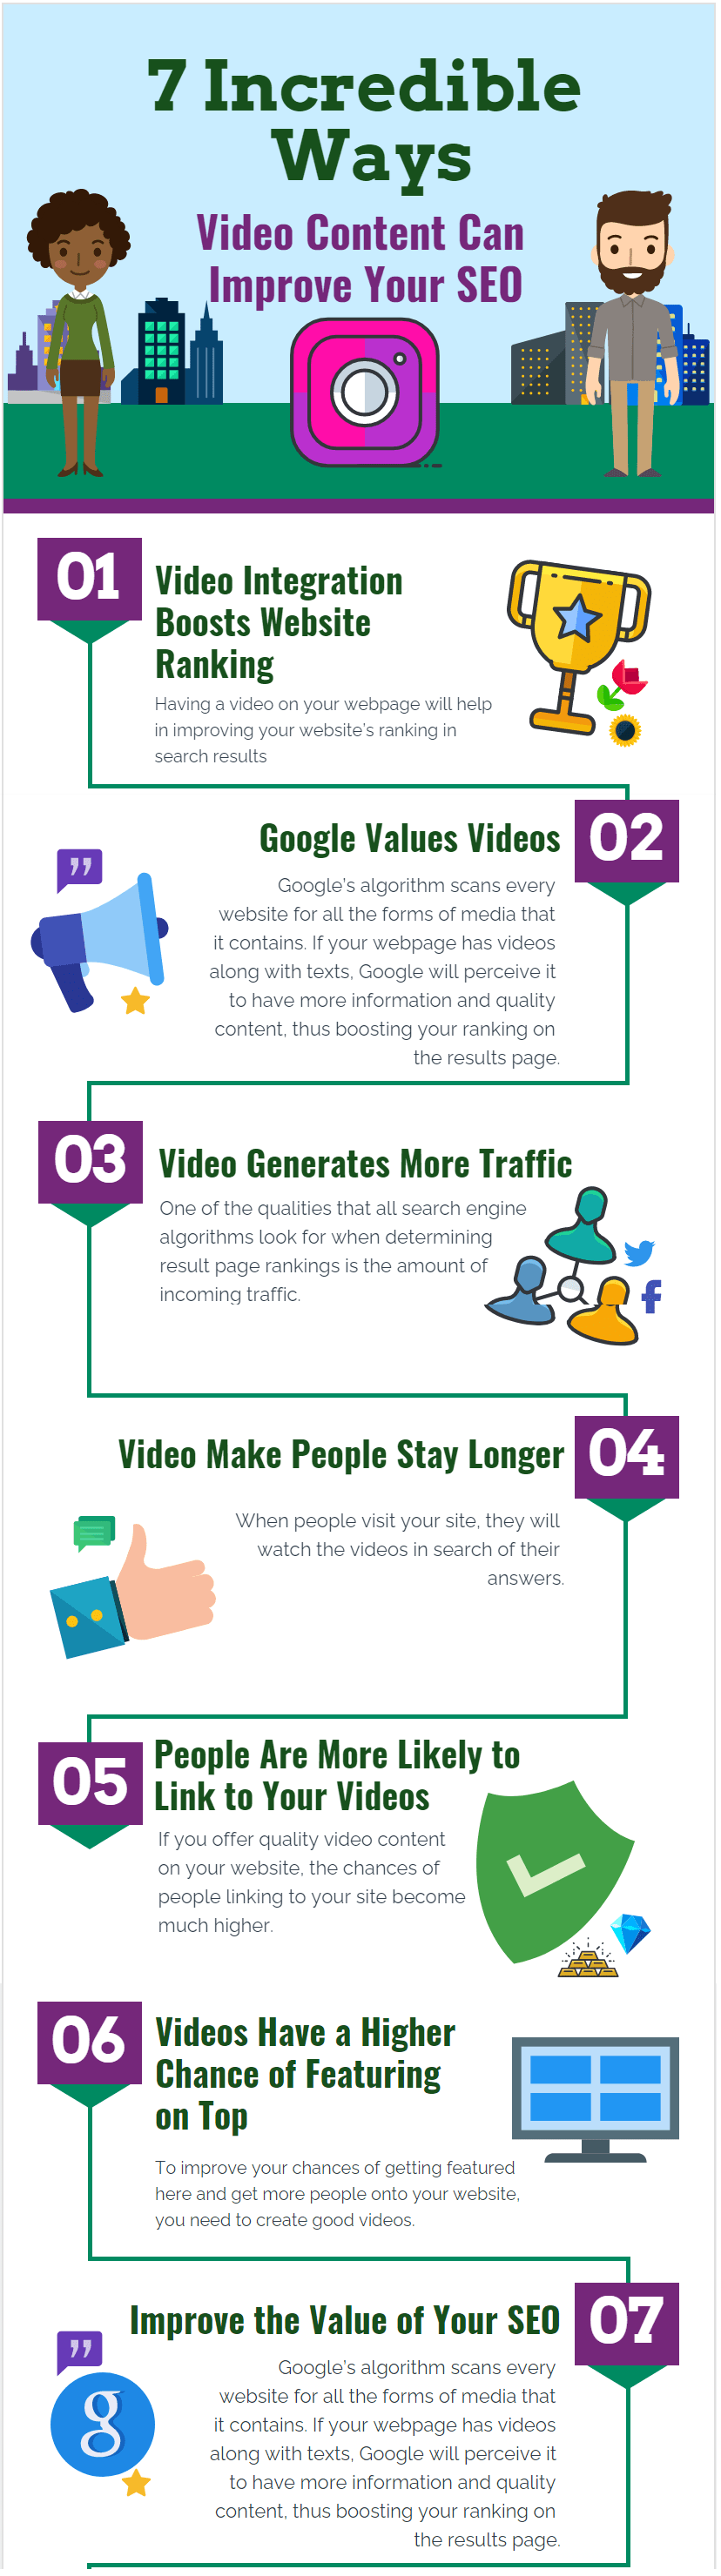 7 Incredible Ways Video Content Can Improve Your SEO3-min